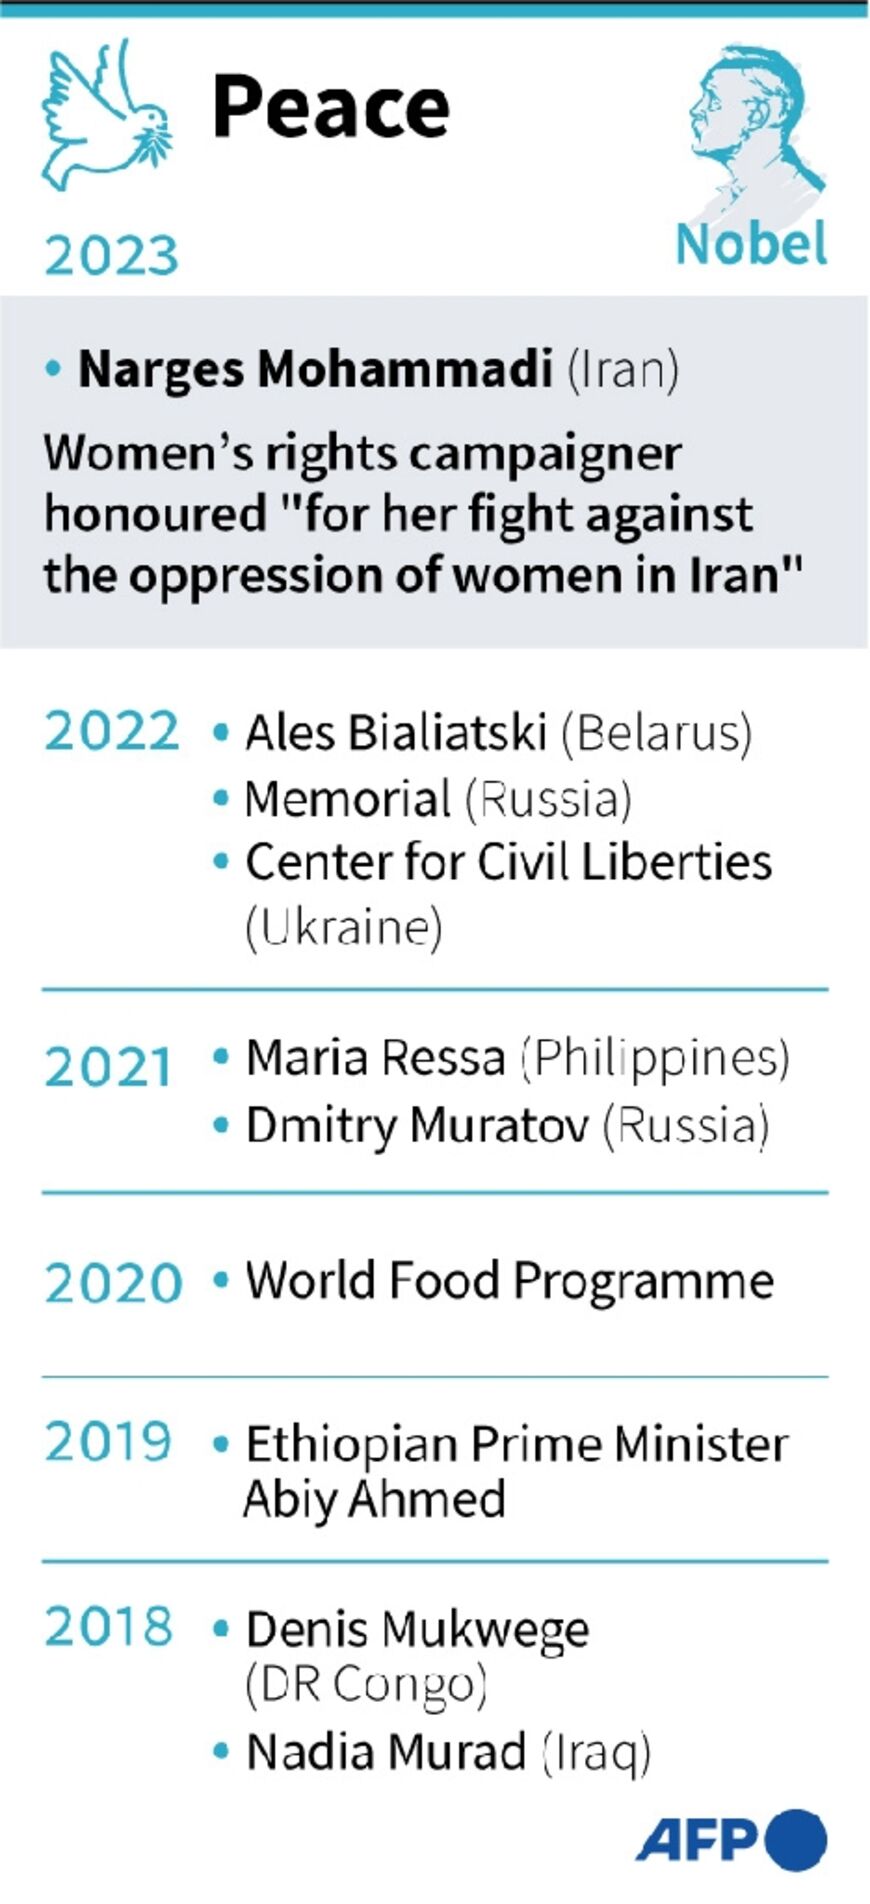 Nobel Peace Prize 2023 goes to Iranian women's rights campaigner Narges Mohammadi 